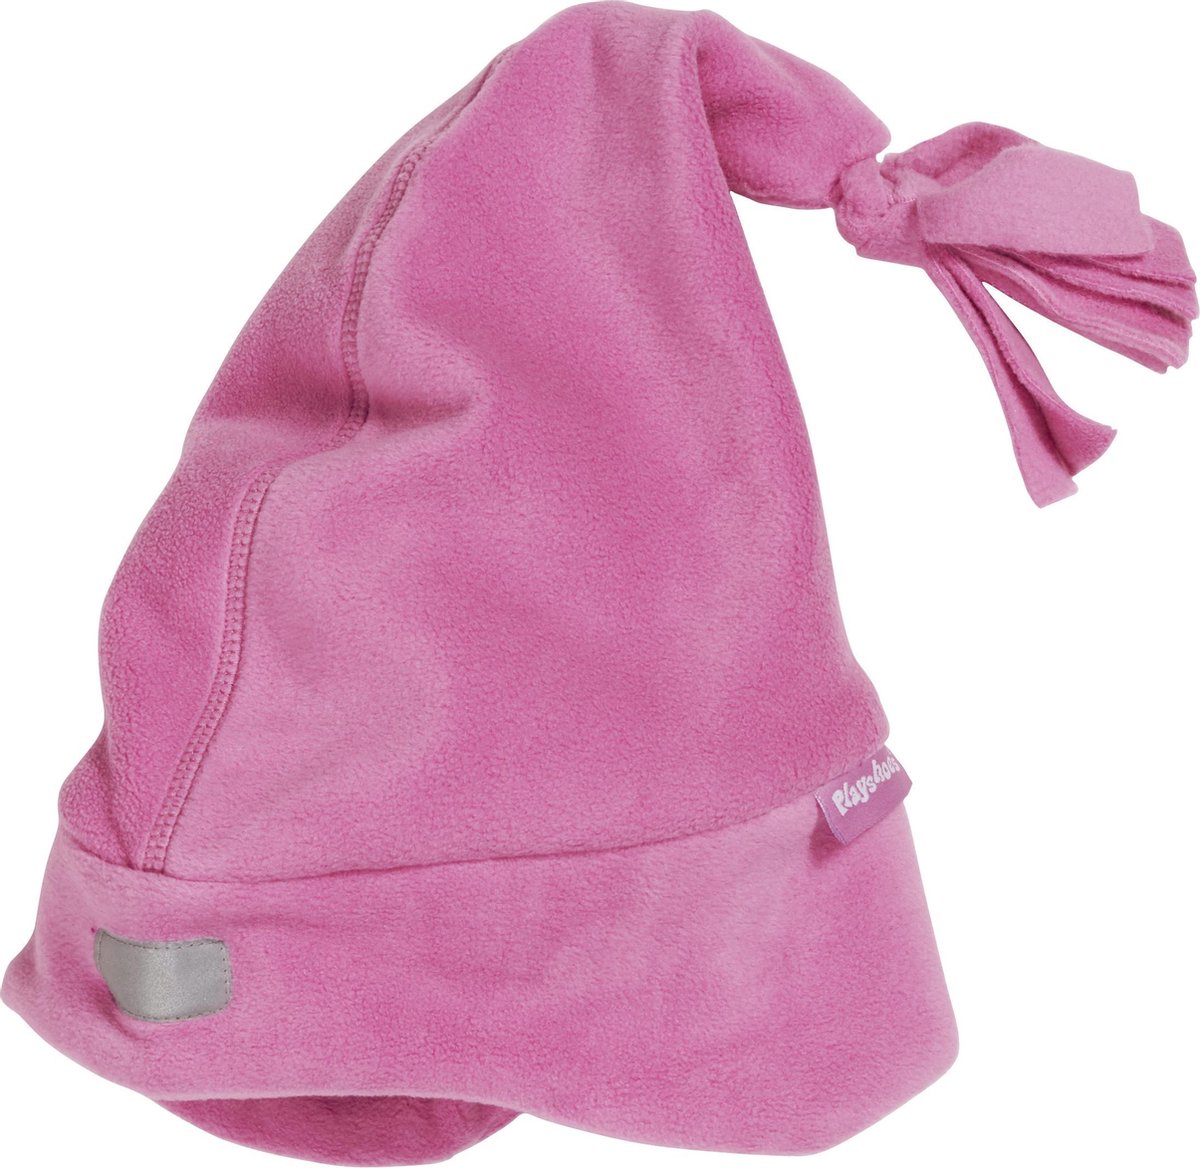 PLAYSHOES - Muffole Rose 0-6 mois PLAYSHOES